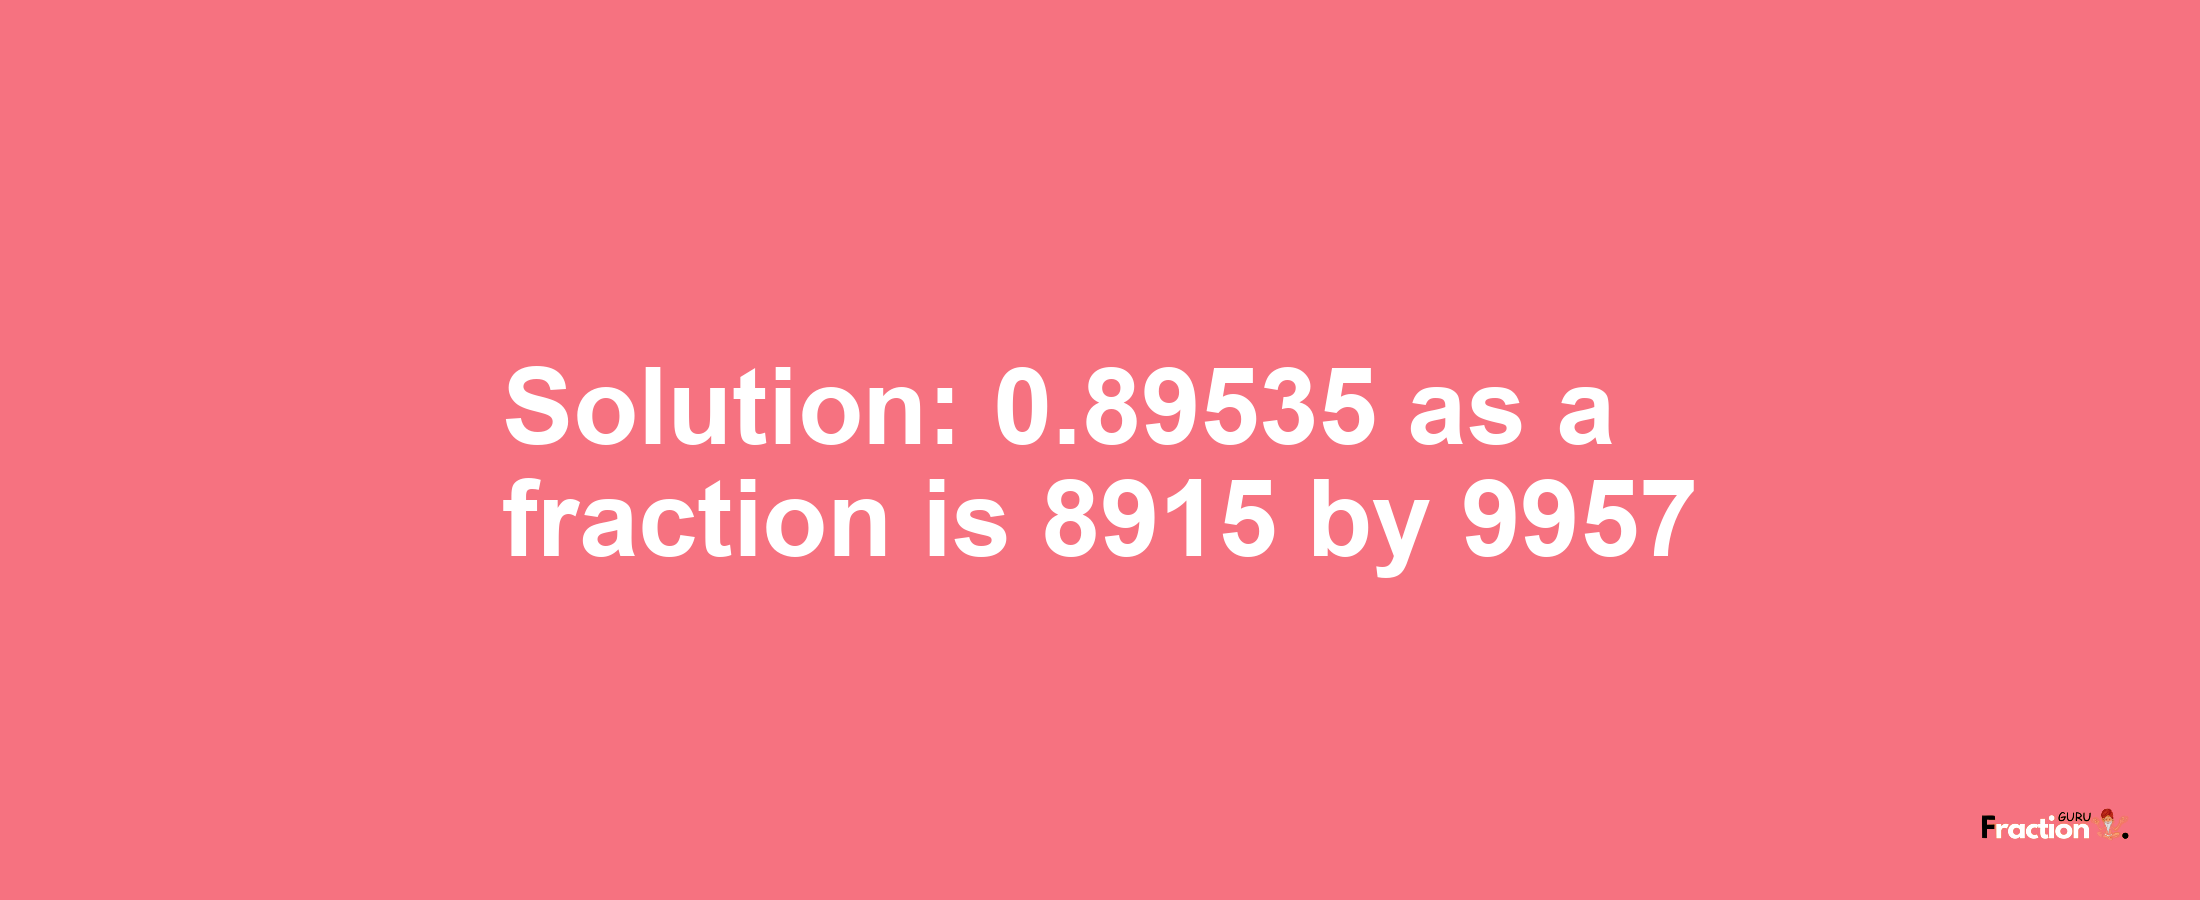 Solution:0.89535 as a fraction is 8915/9957